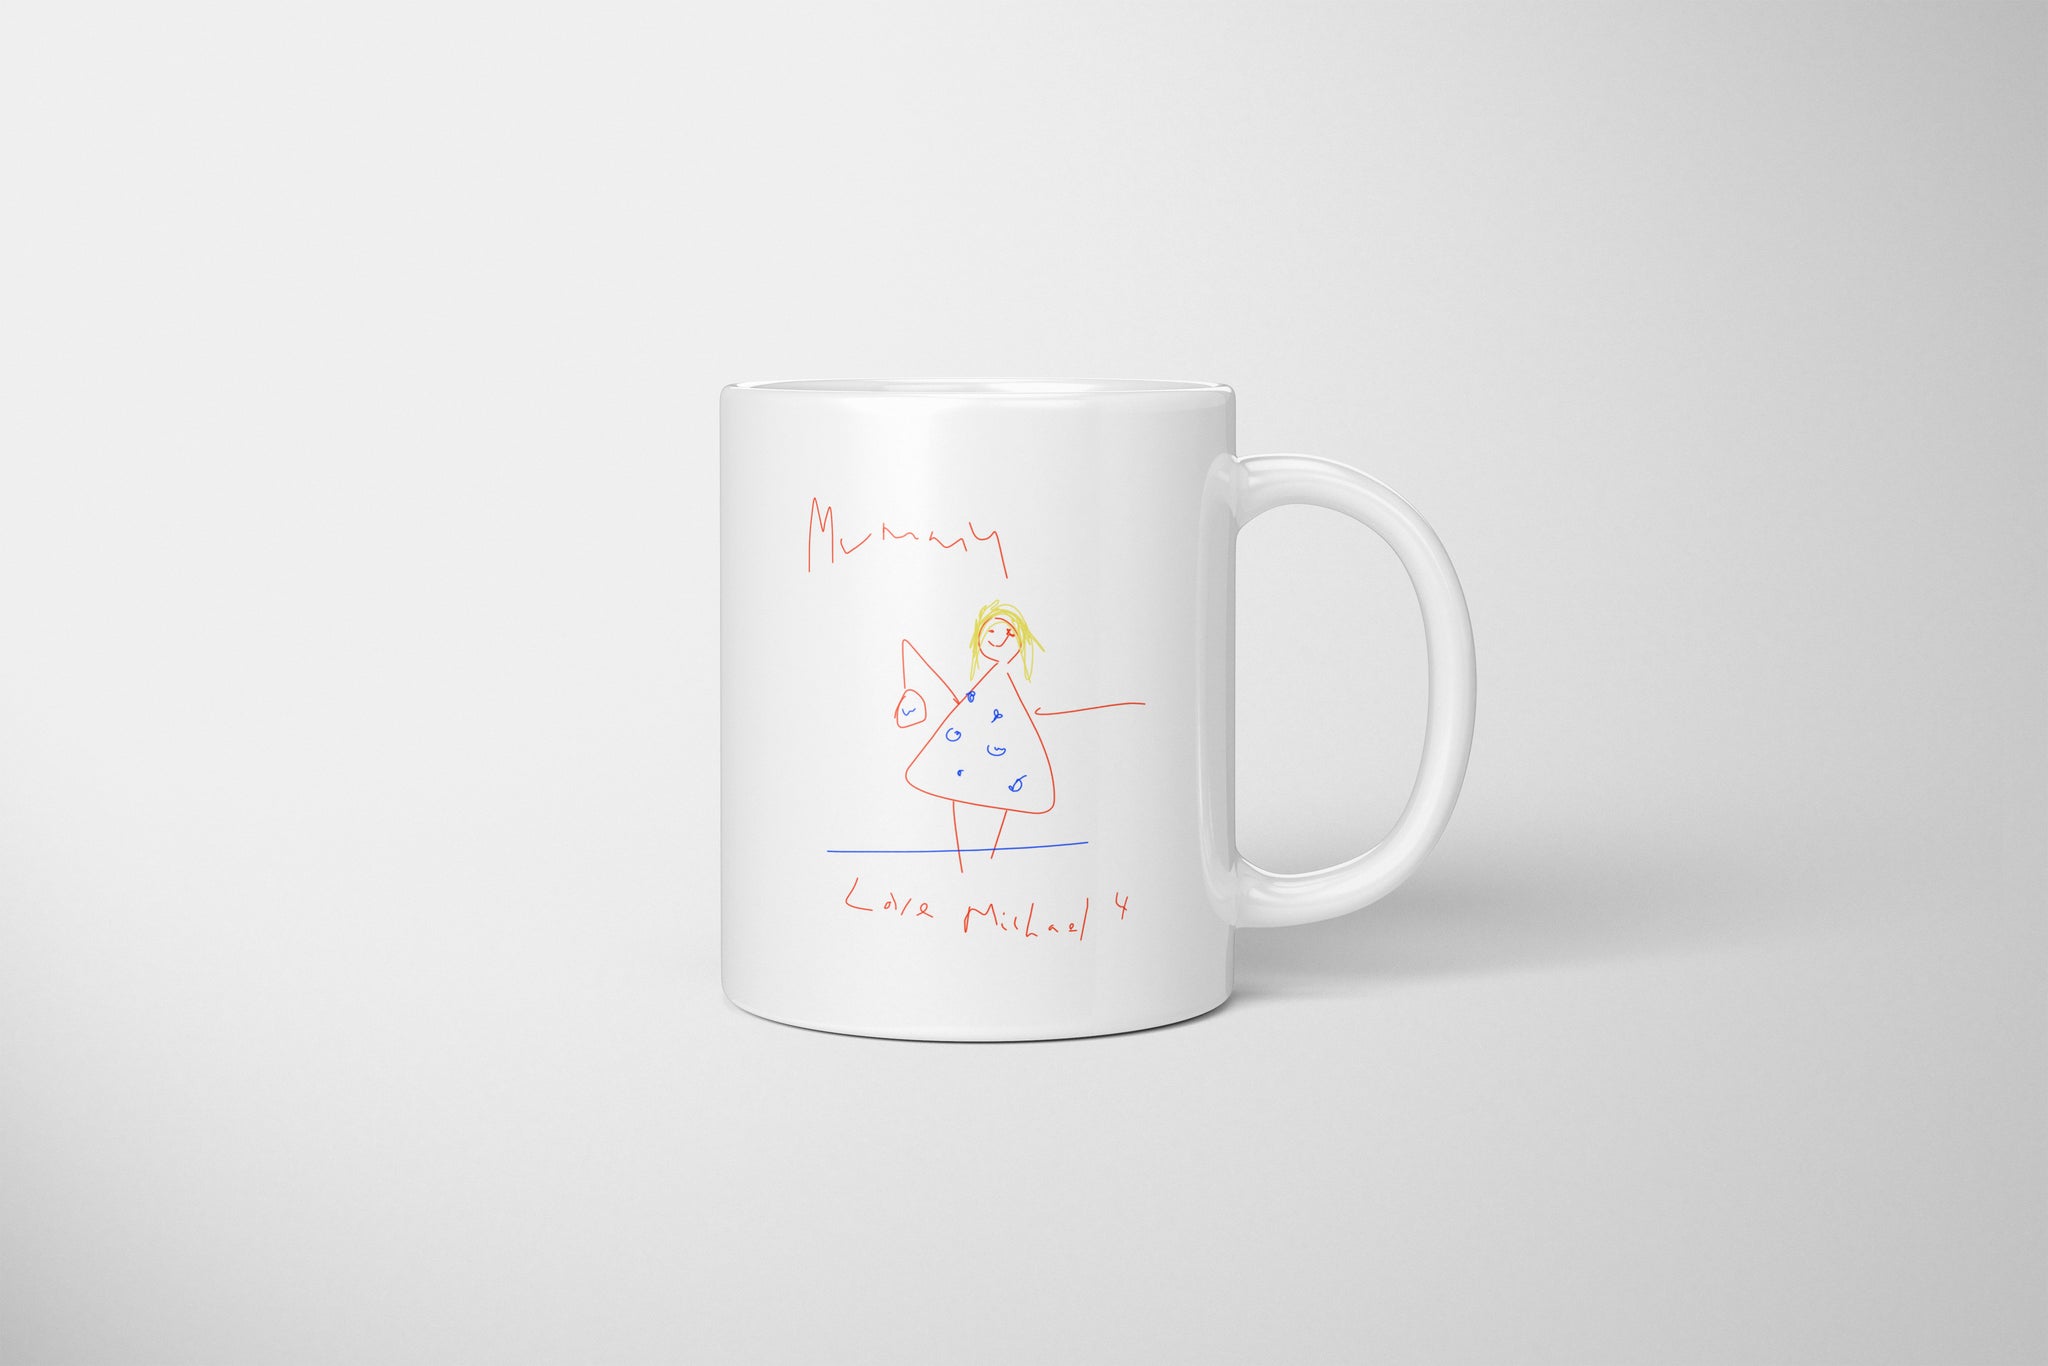 Your Child's Drawing On A Mug, Childs Drawing Mug, Personalised Drawing Mug, Personalised Sketch Mug, Kid's Drawing On Mug, Perfect Gift, Mum, Dad, Grandparent